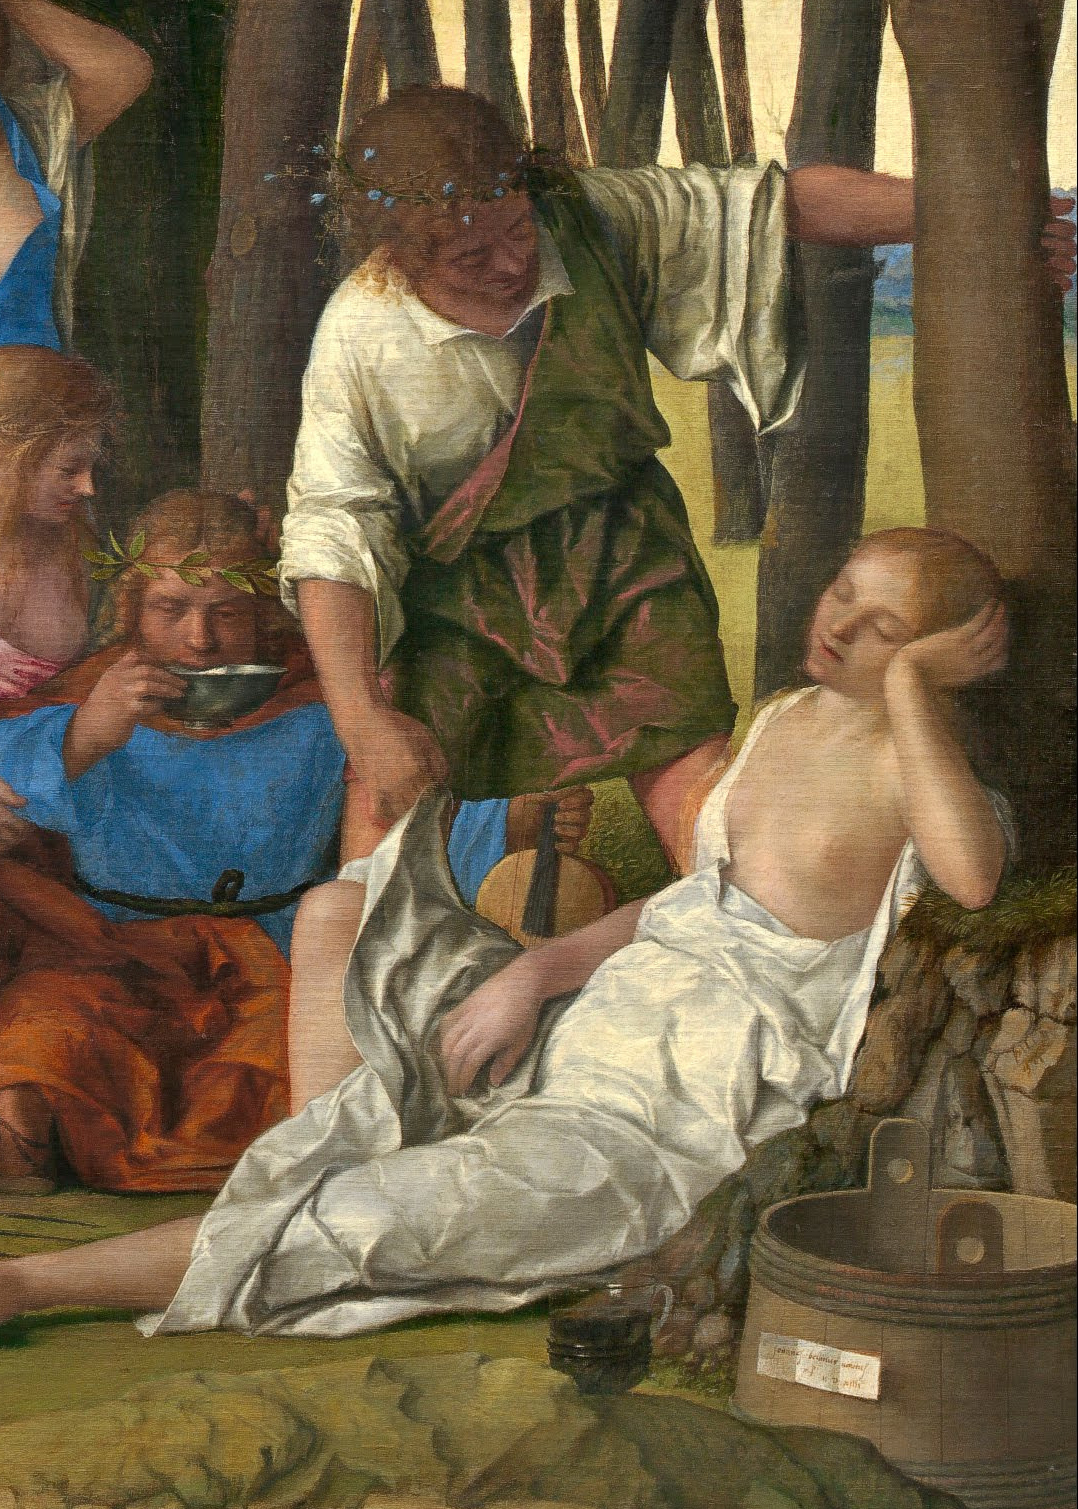 Priapus and Lotis, detail of The Feast of the Gods by Giovanni Bellini (c. 1514)（喜闻乐见躲男人变树是吧x）